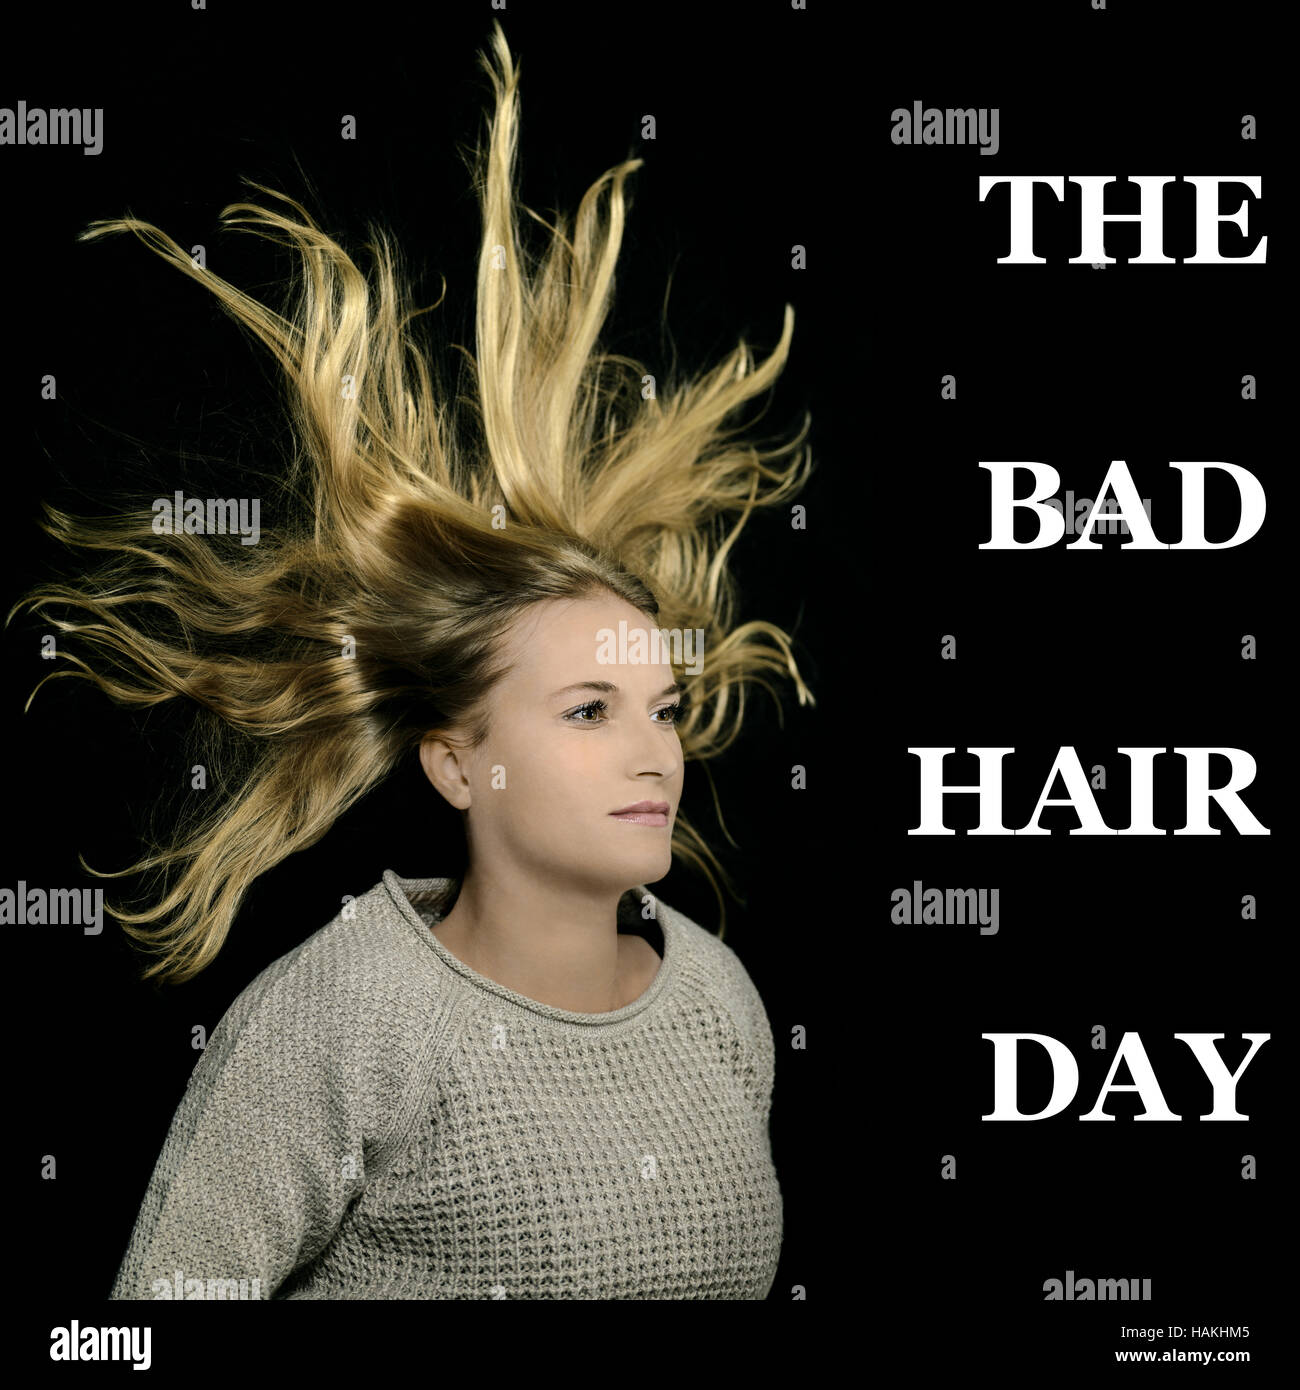 Woman with wild hair style having a bad hair day Stock Photo